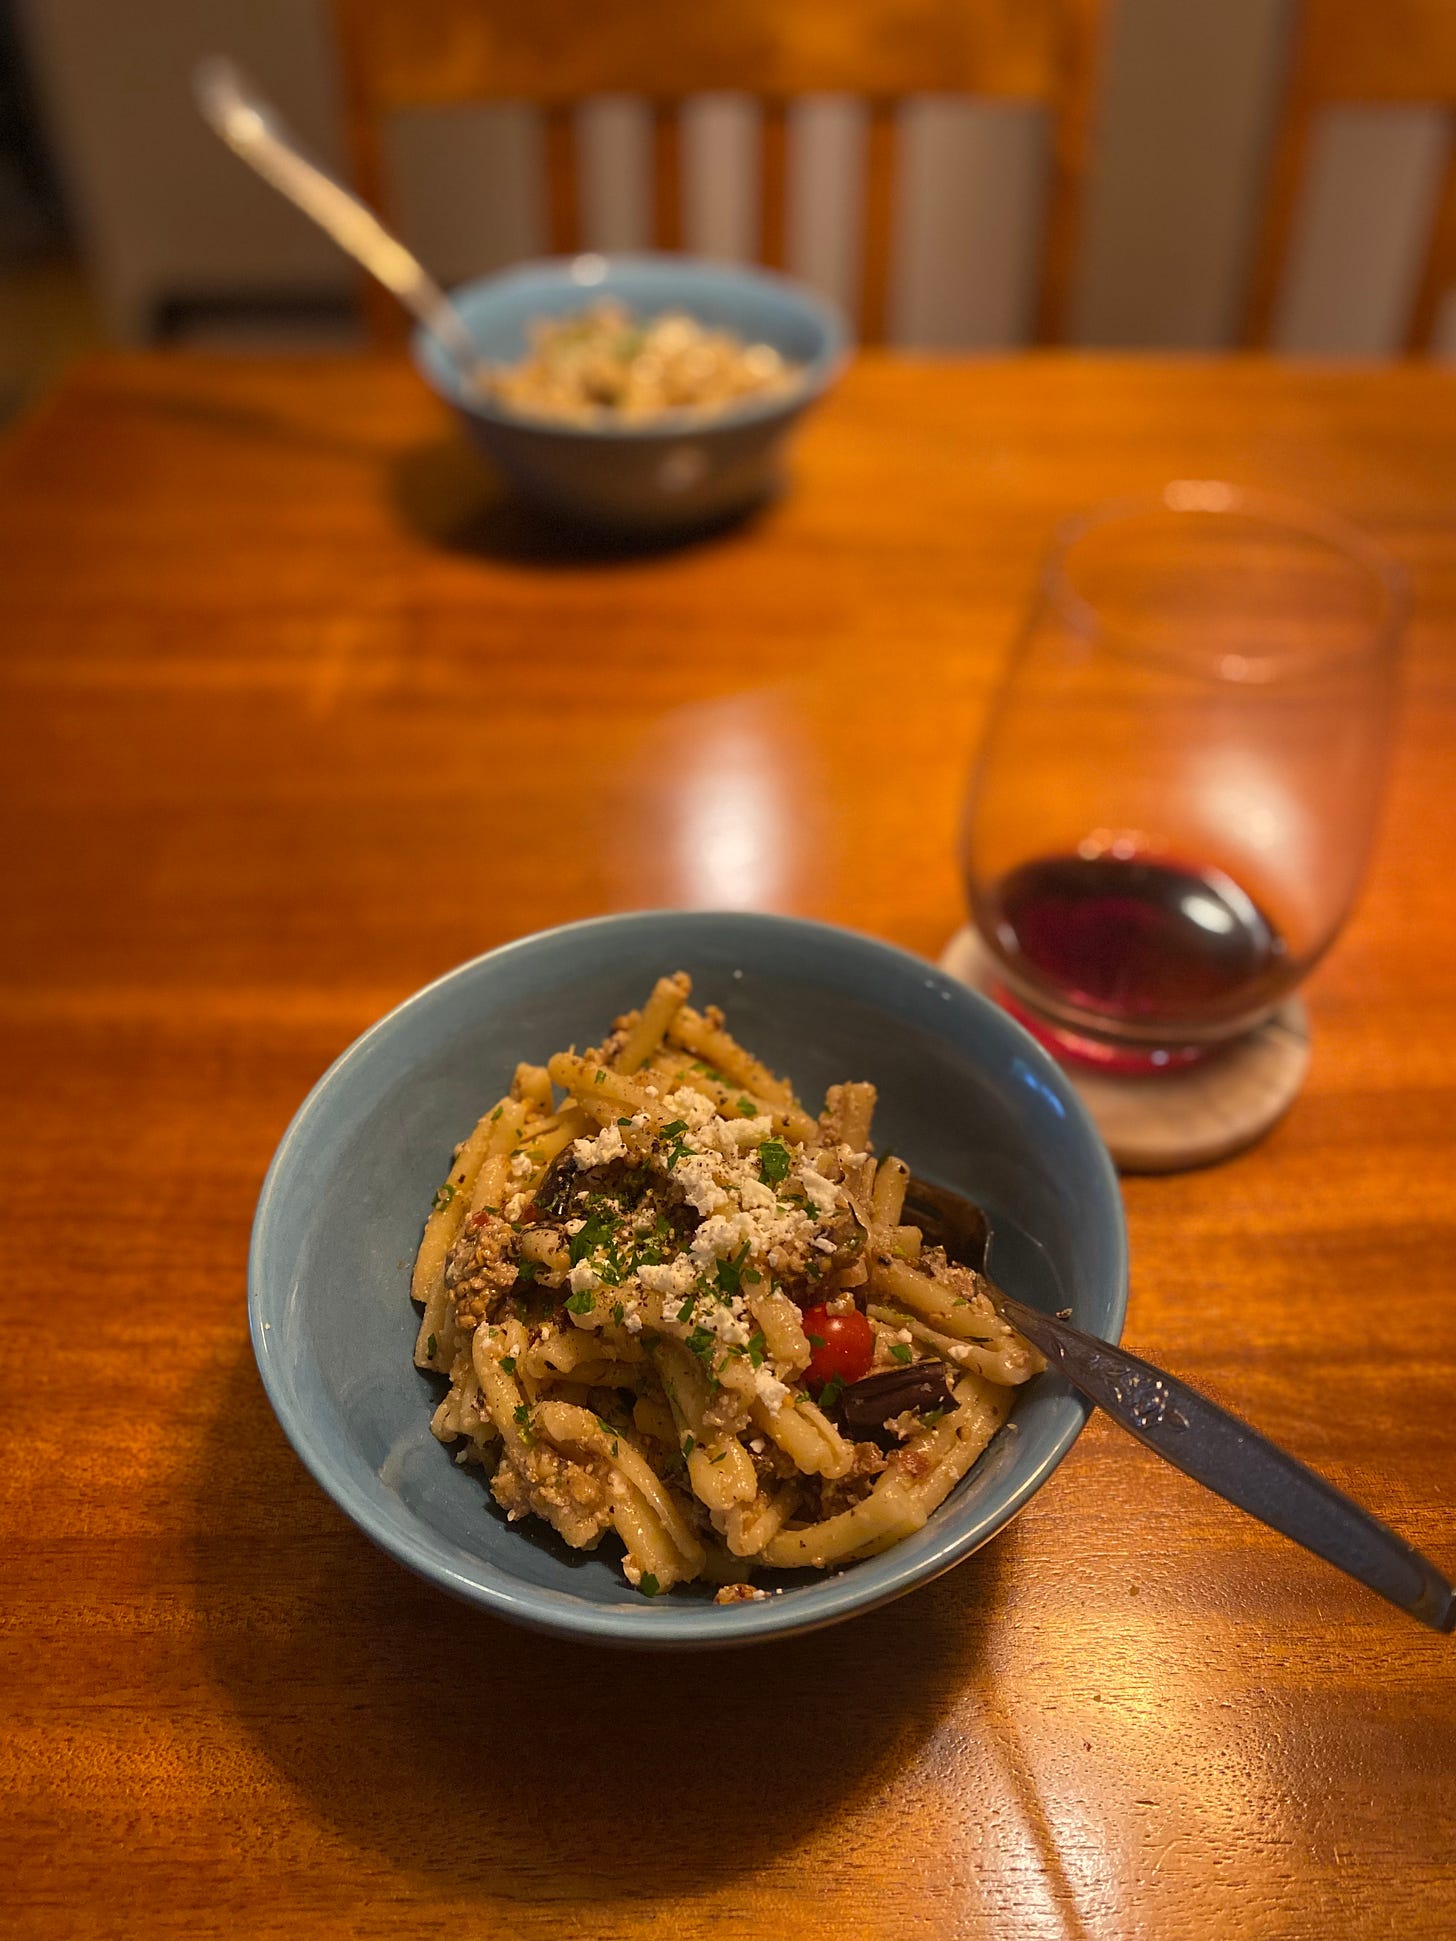 Two blue bowls across from each other on a table, each with pasta salad made with casarecce. The salad has pieces of eggplant and small red tomatoes throughout, and the top is covered with ground pepper and crumbled feta. A half-finished glass of red wine rests on the coaster behind the nearest bowl.